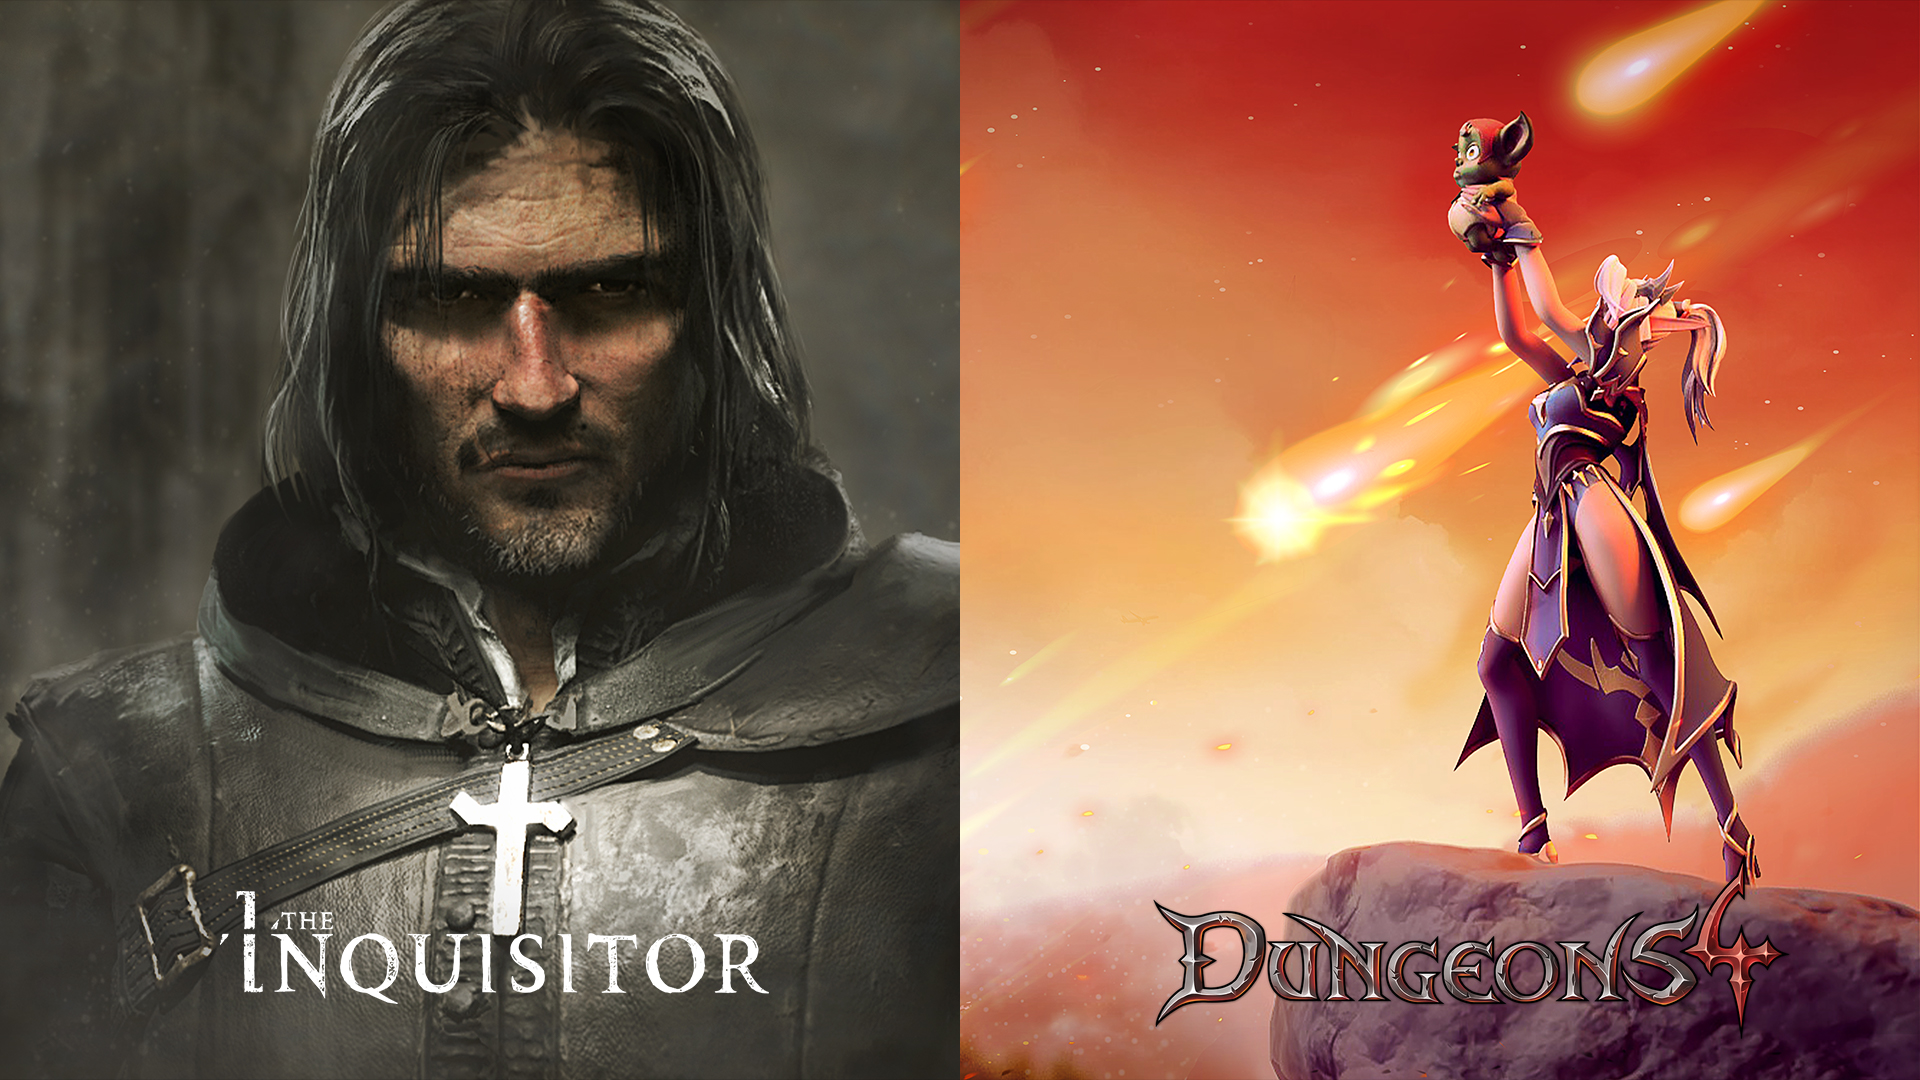 The Inquisitor Dungeons 4